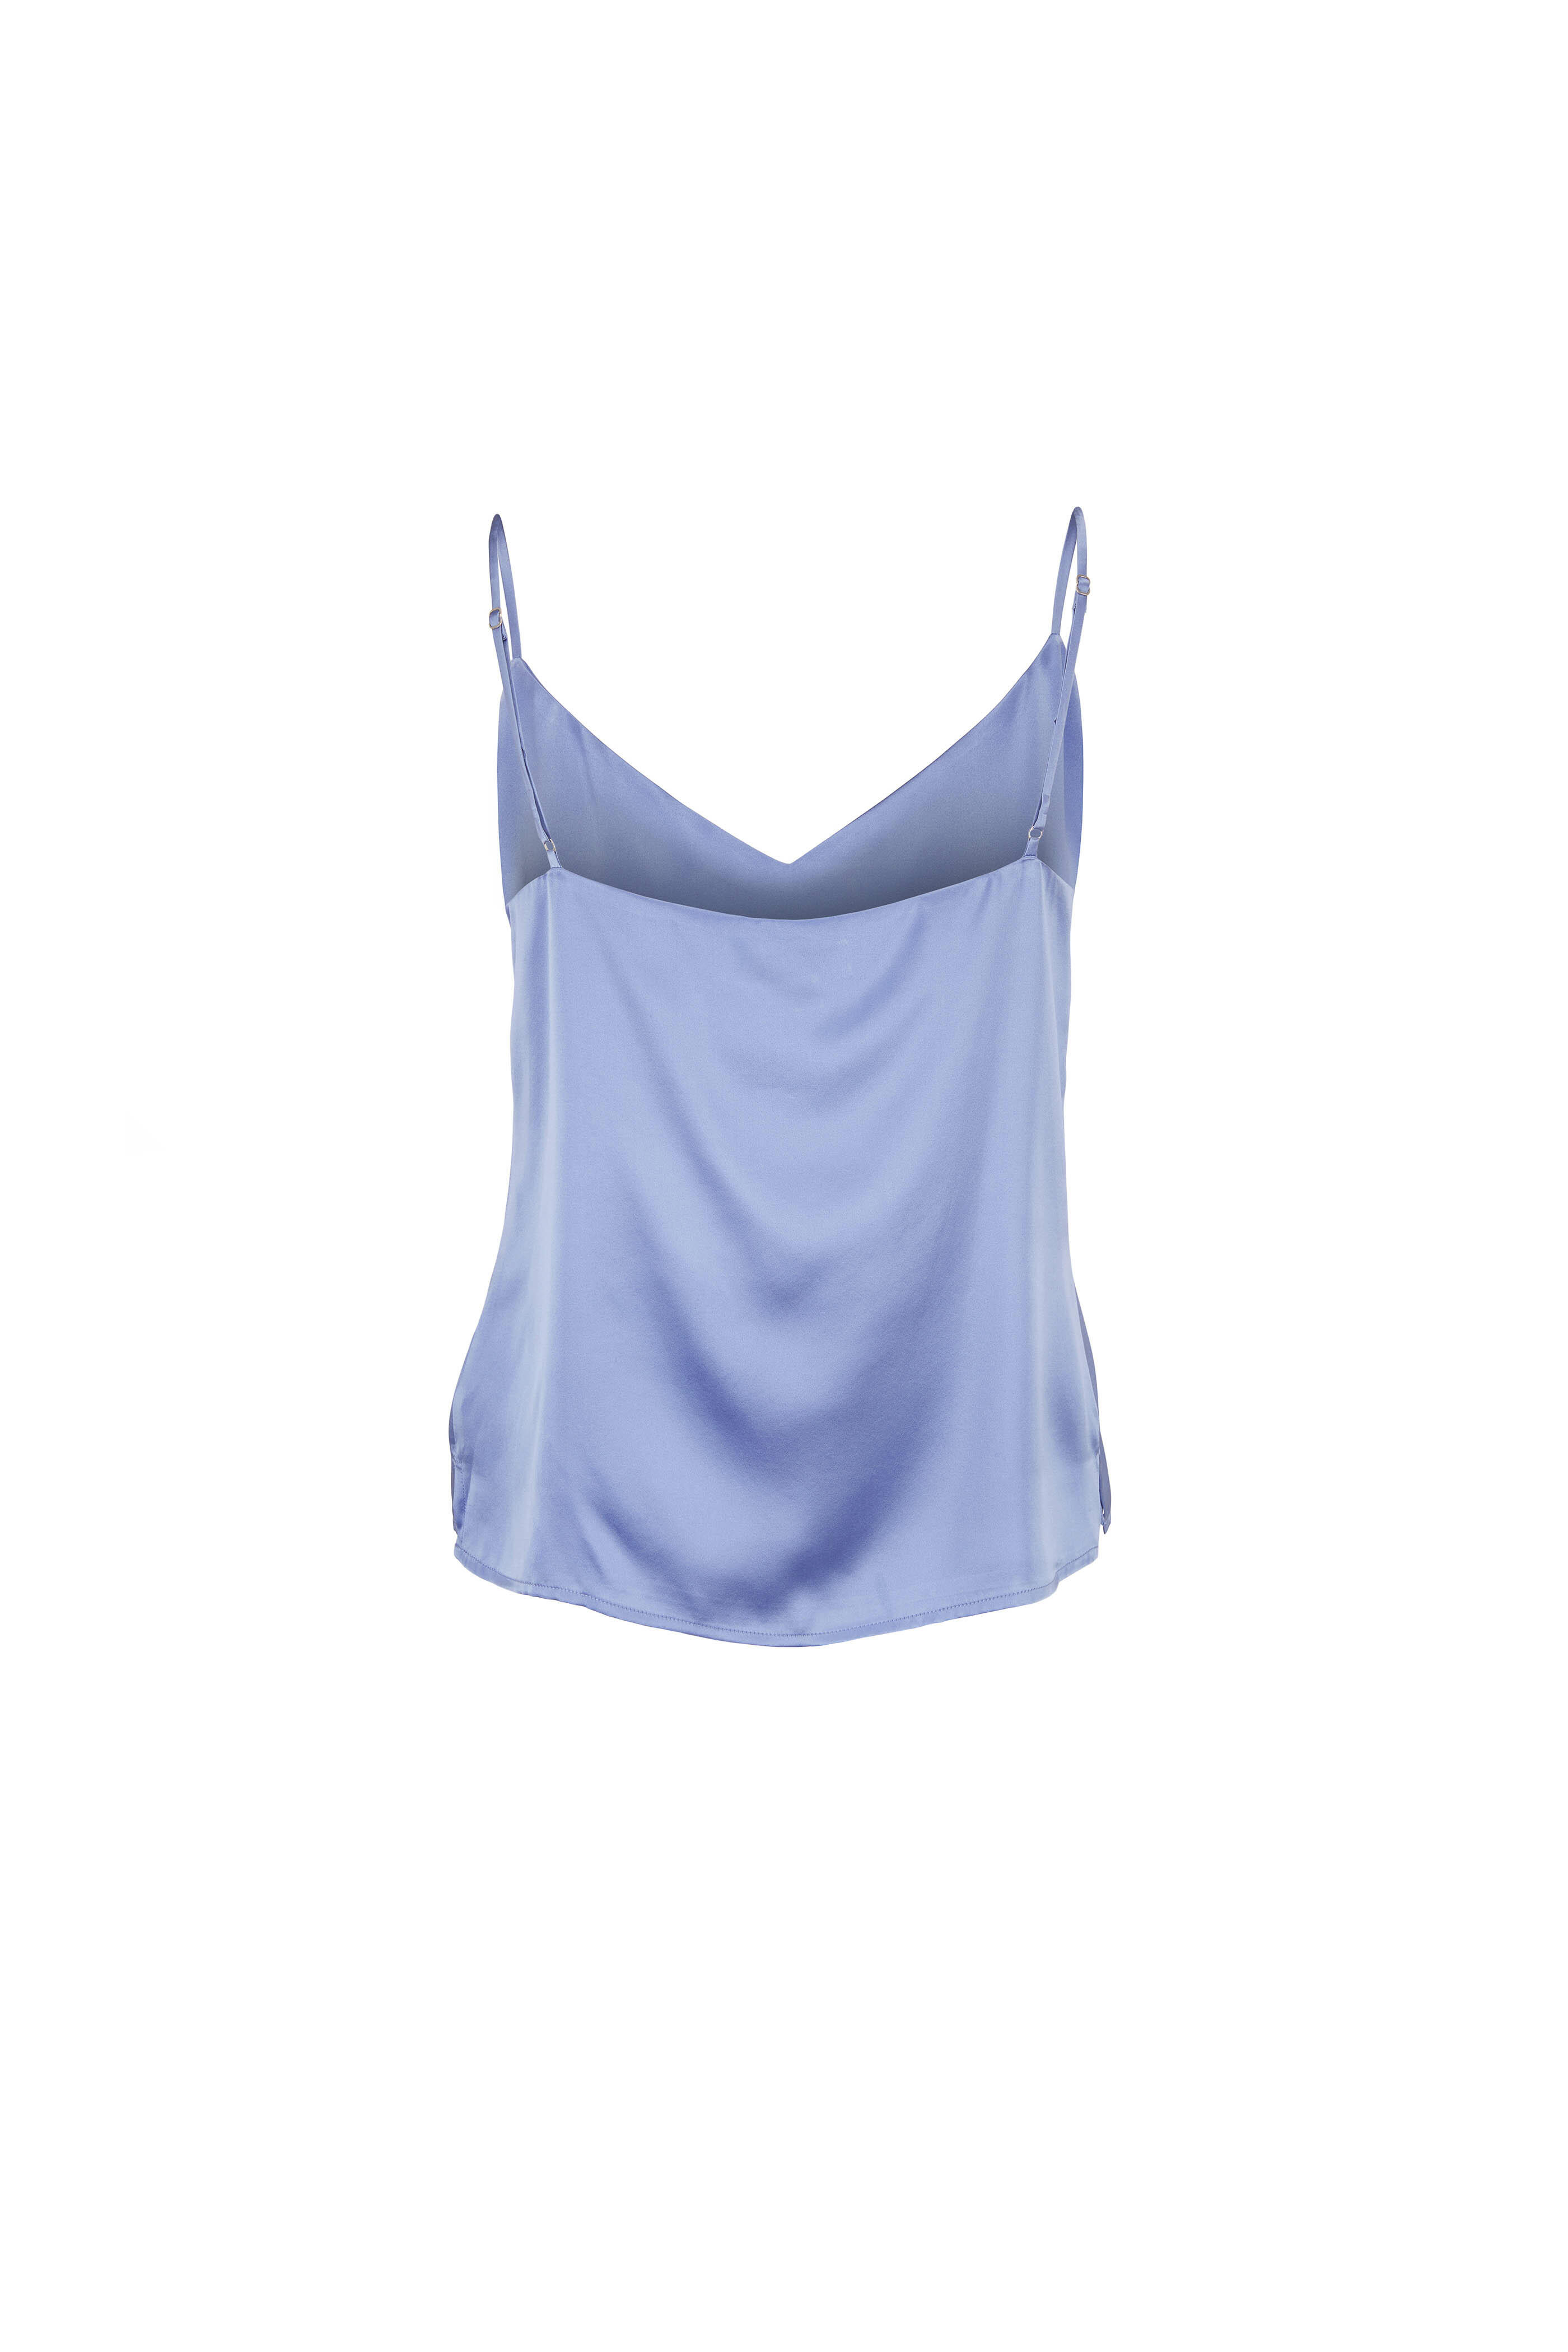 L'Agence - Jane Periwinkle Silk Cami